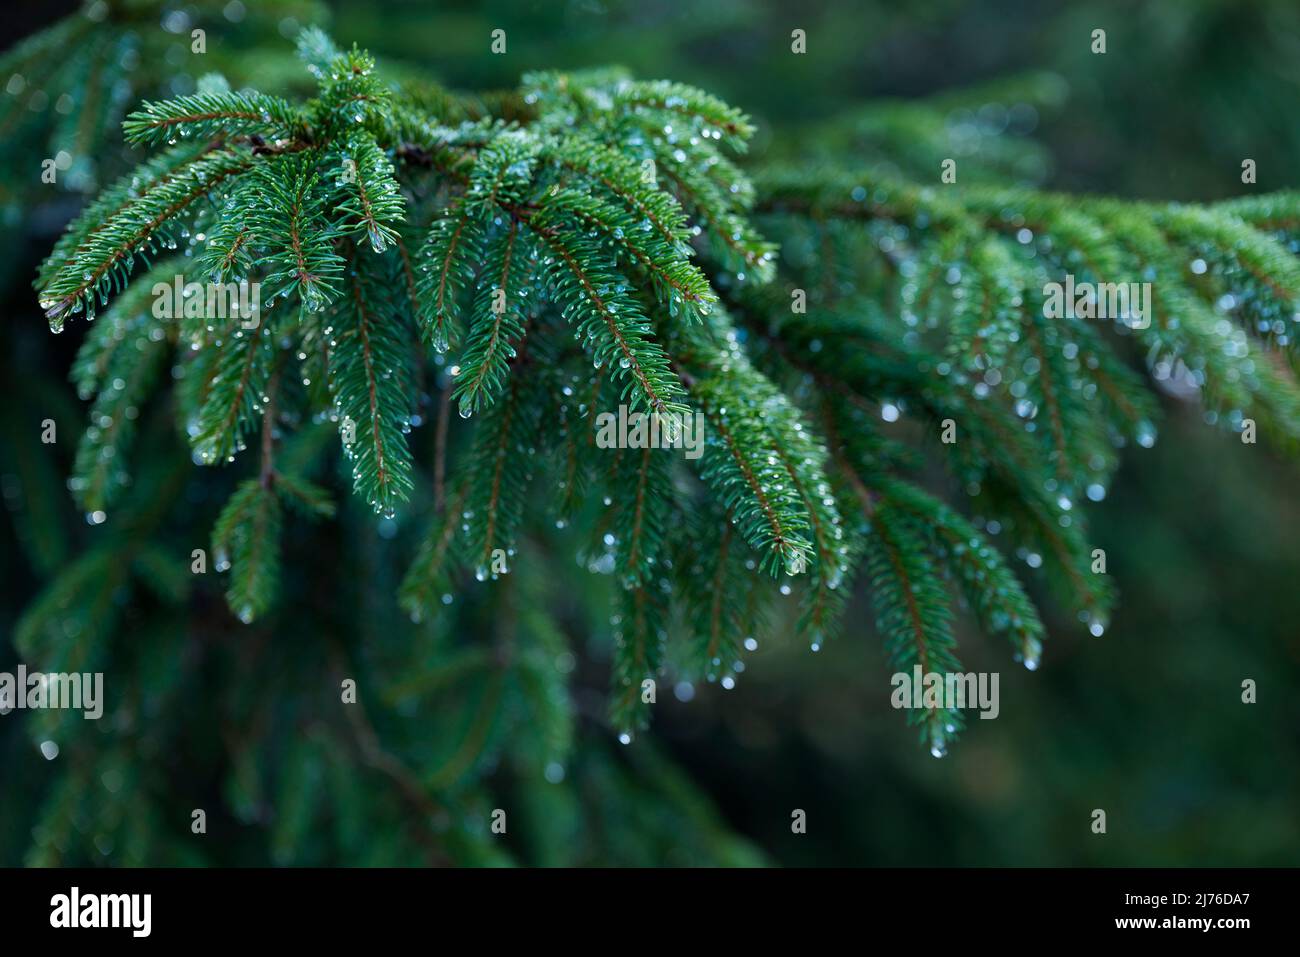 Water drops on spruce branches, France, Vosges Mountains Stock Photo